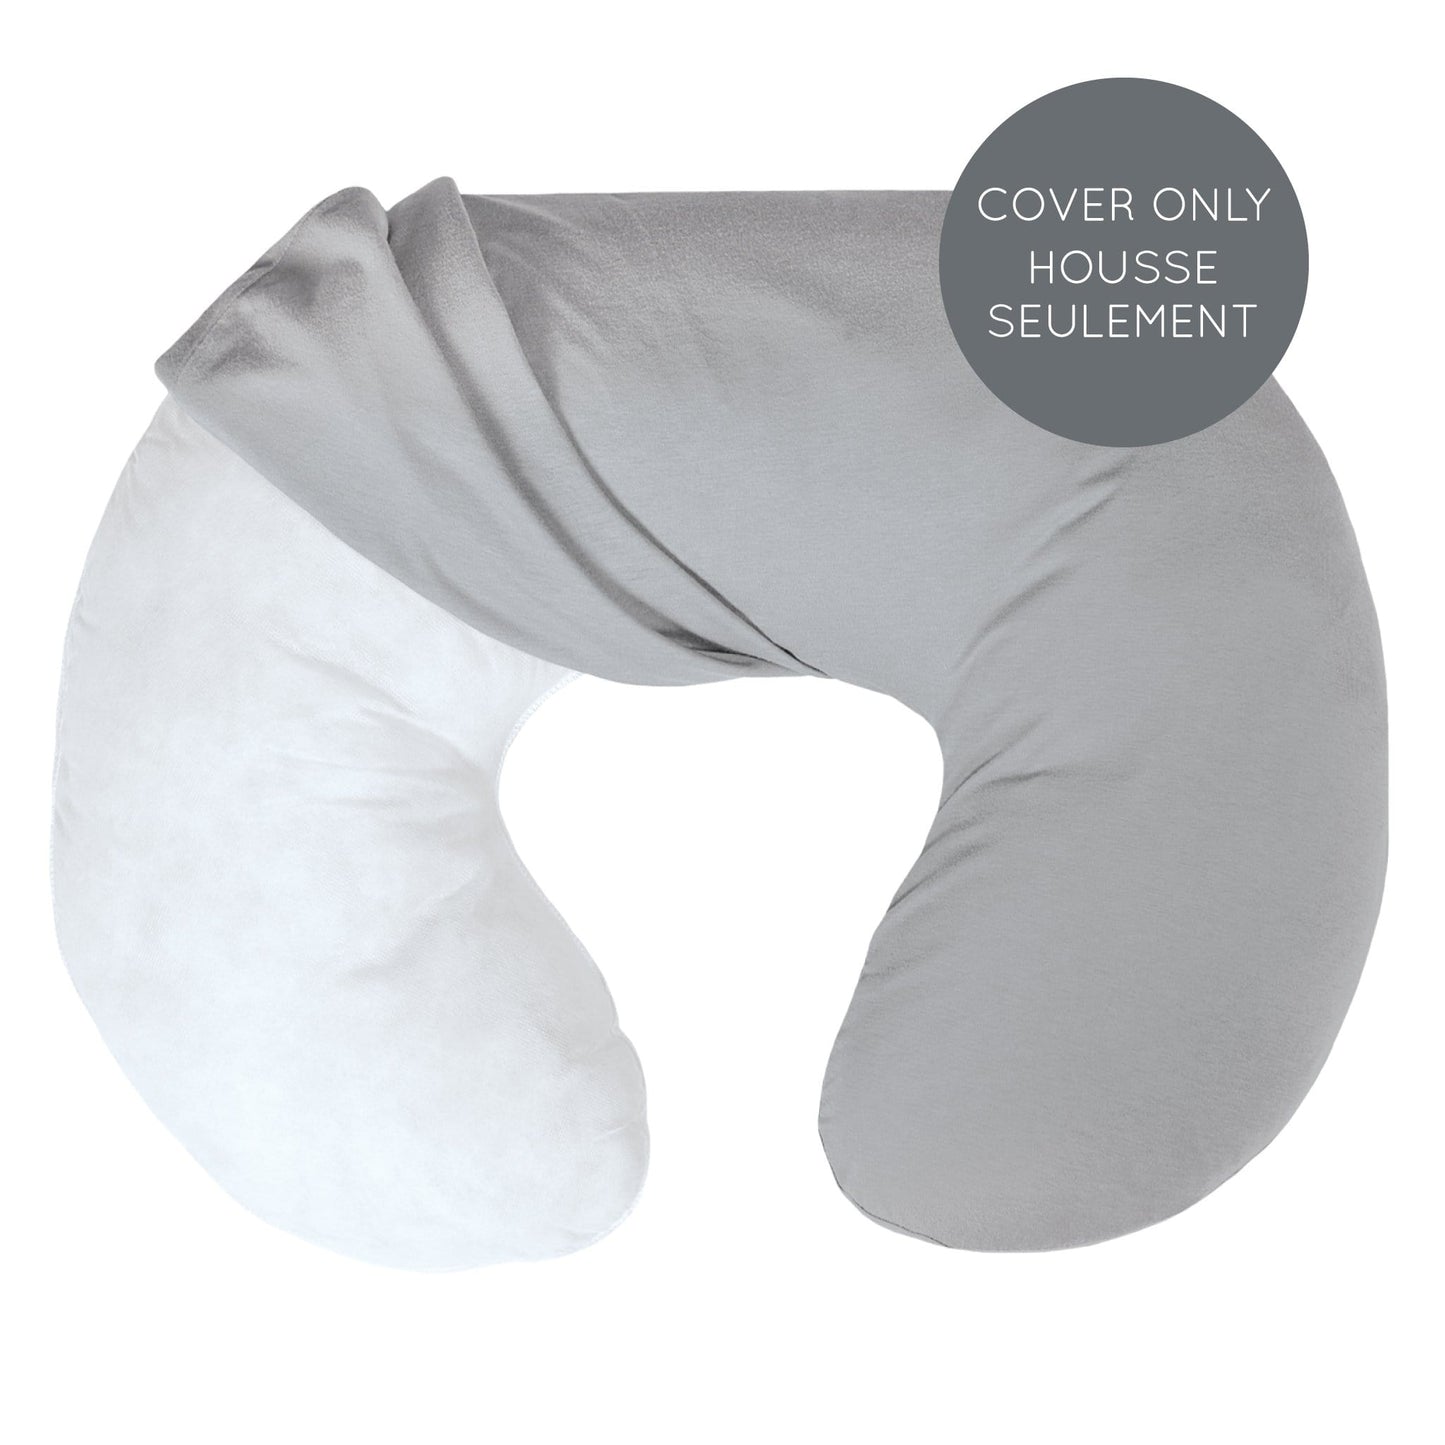 Bamboo nursing pillow - COVER ONLY